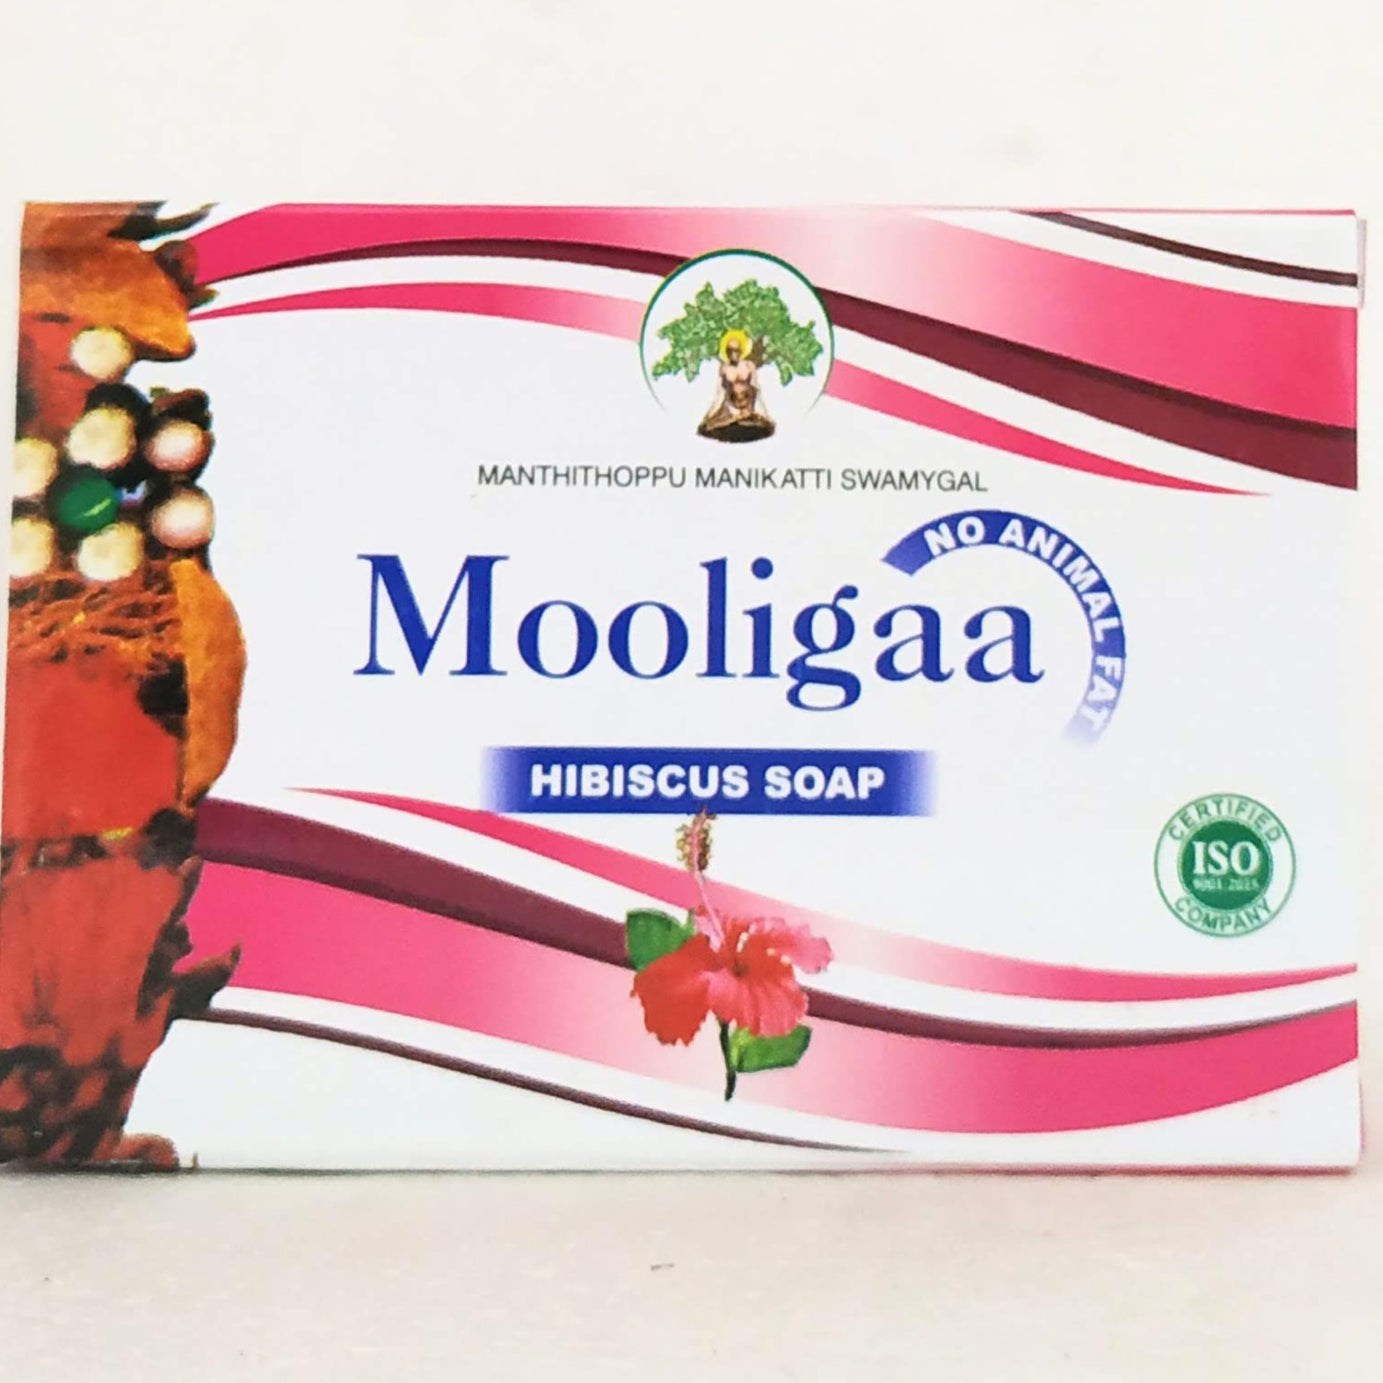 Shop Mooliga hibiscus soap 100gm at price 38.00 from Manthithoppu Online - Ayush Care